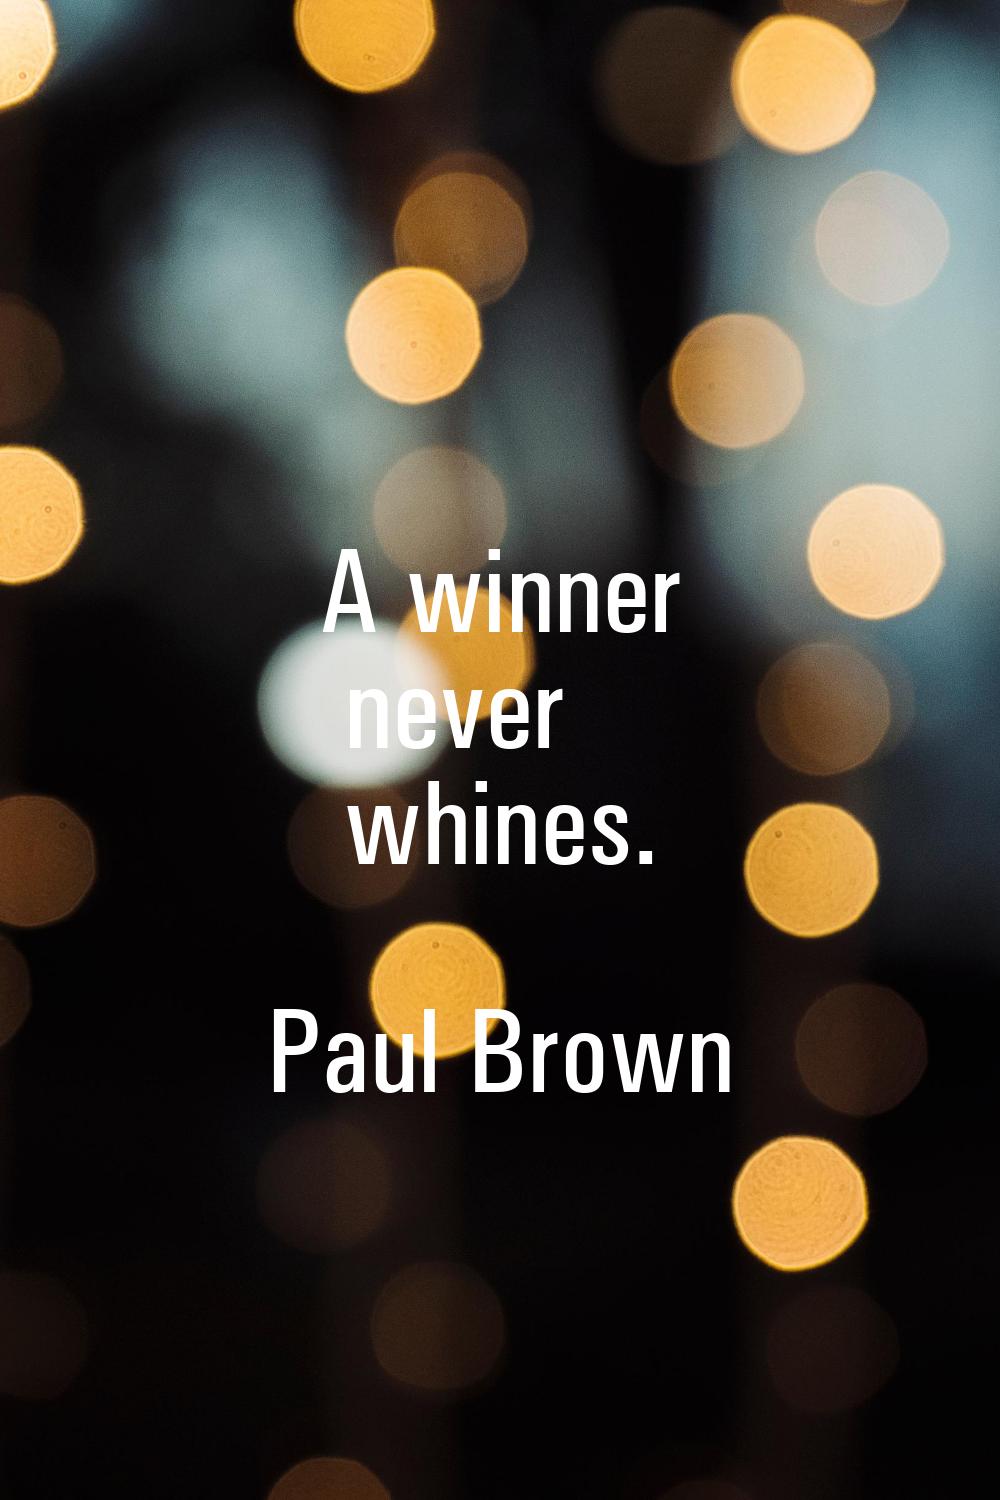 A winner never whines.